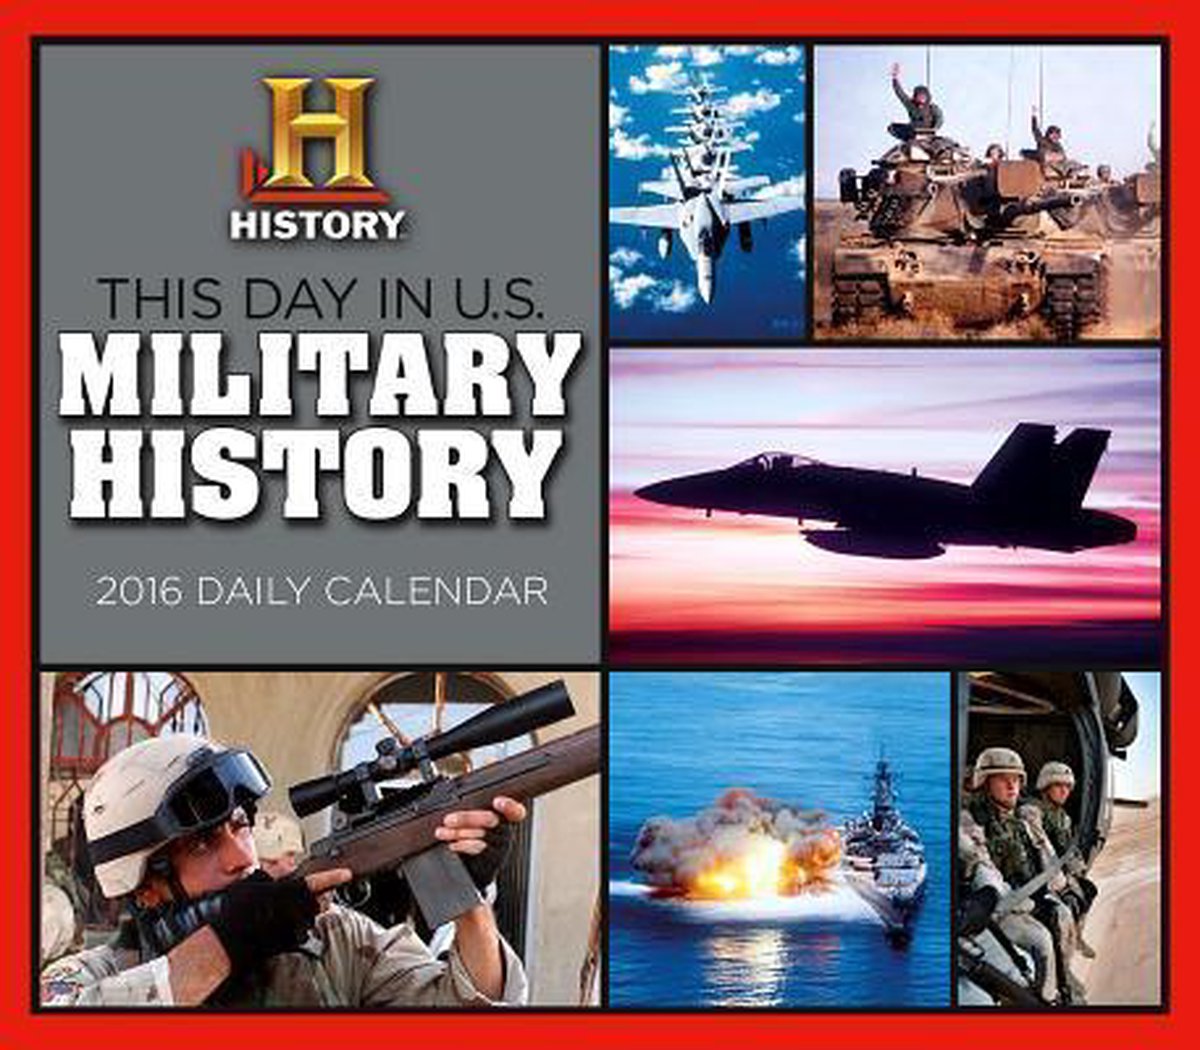 This Day in U.S. Military History Calendar, History Channel